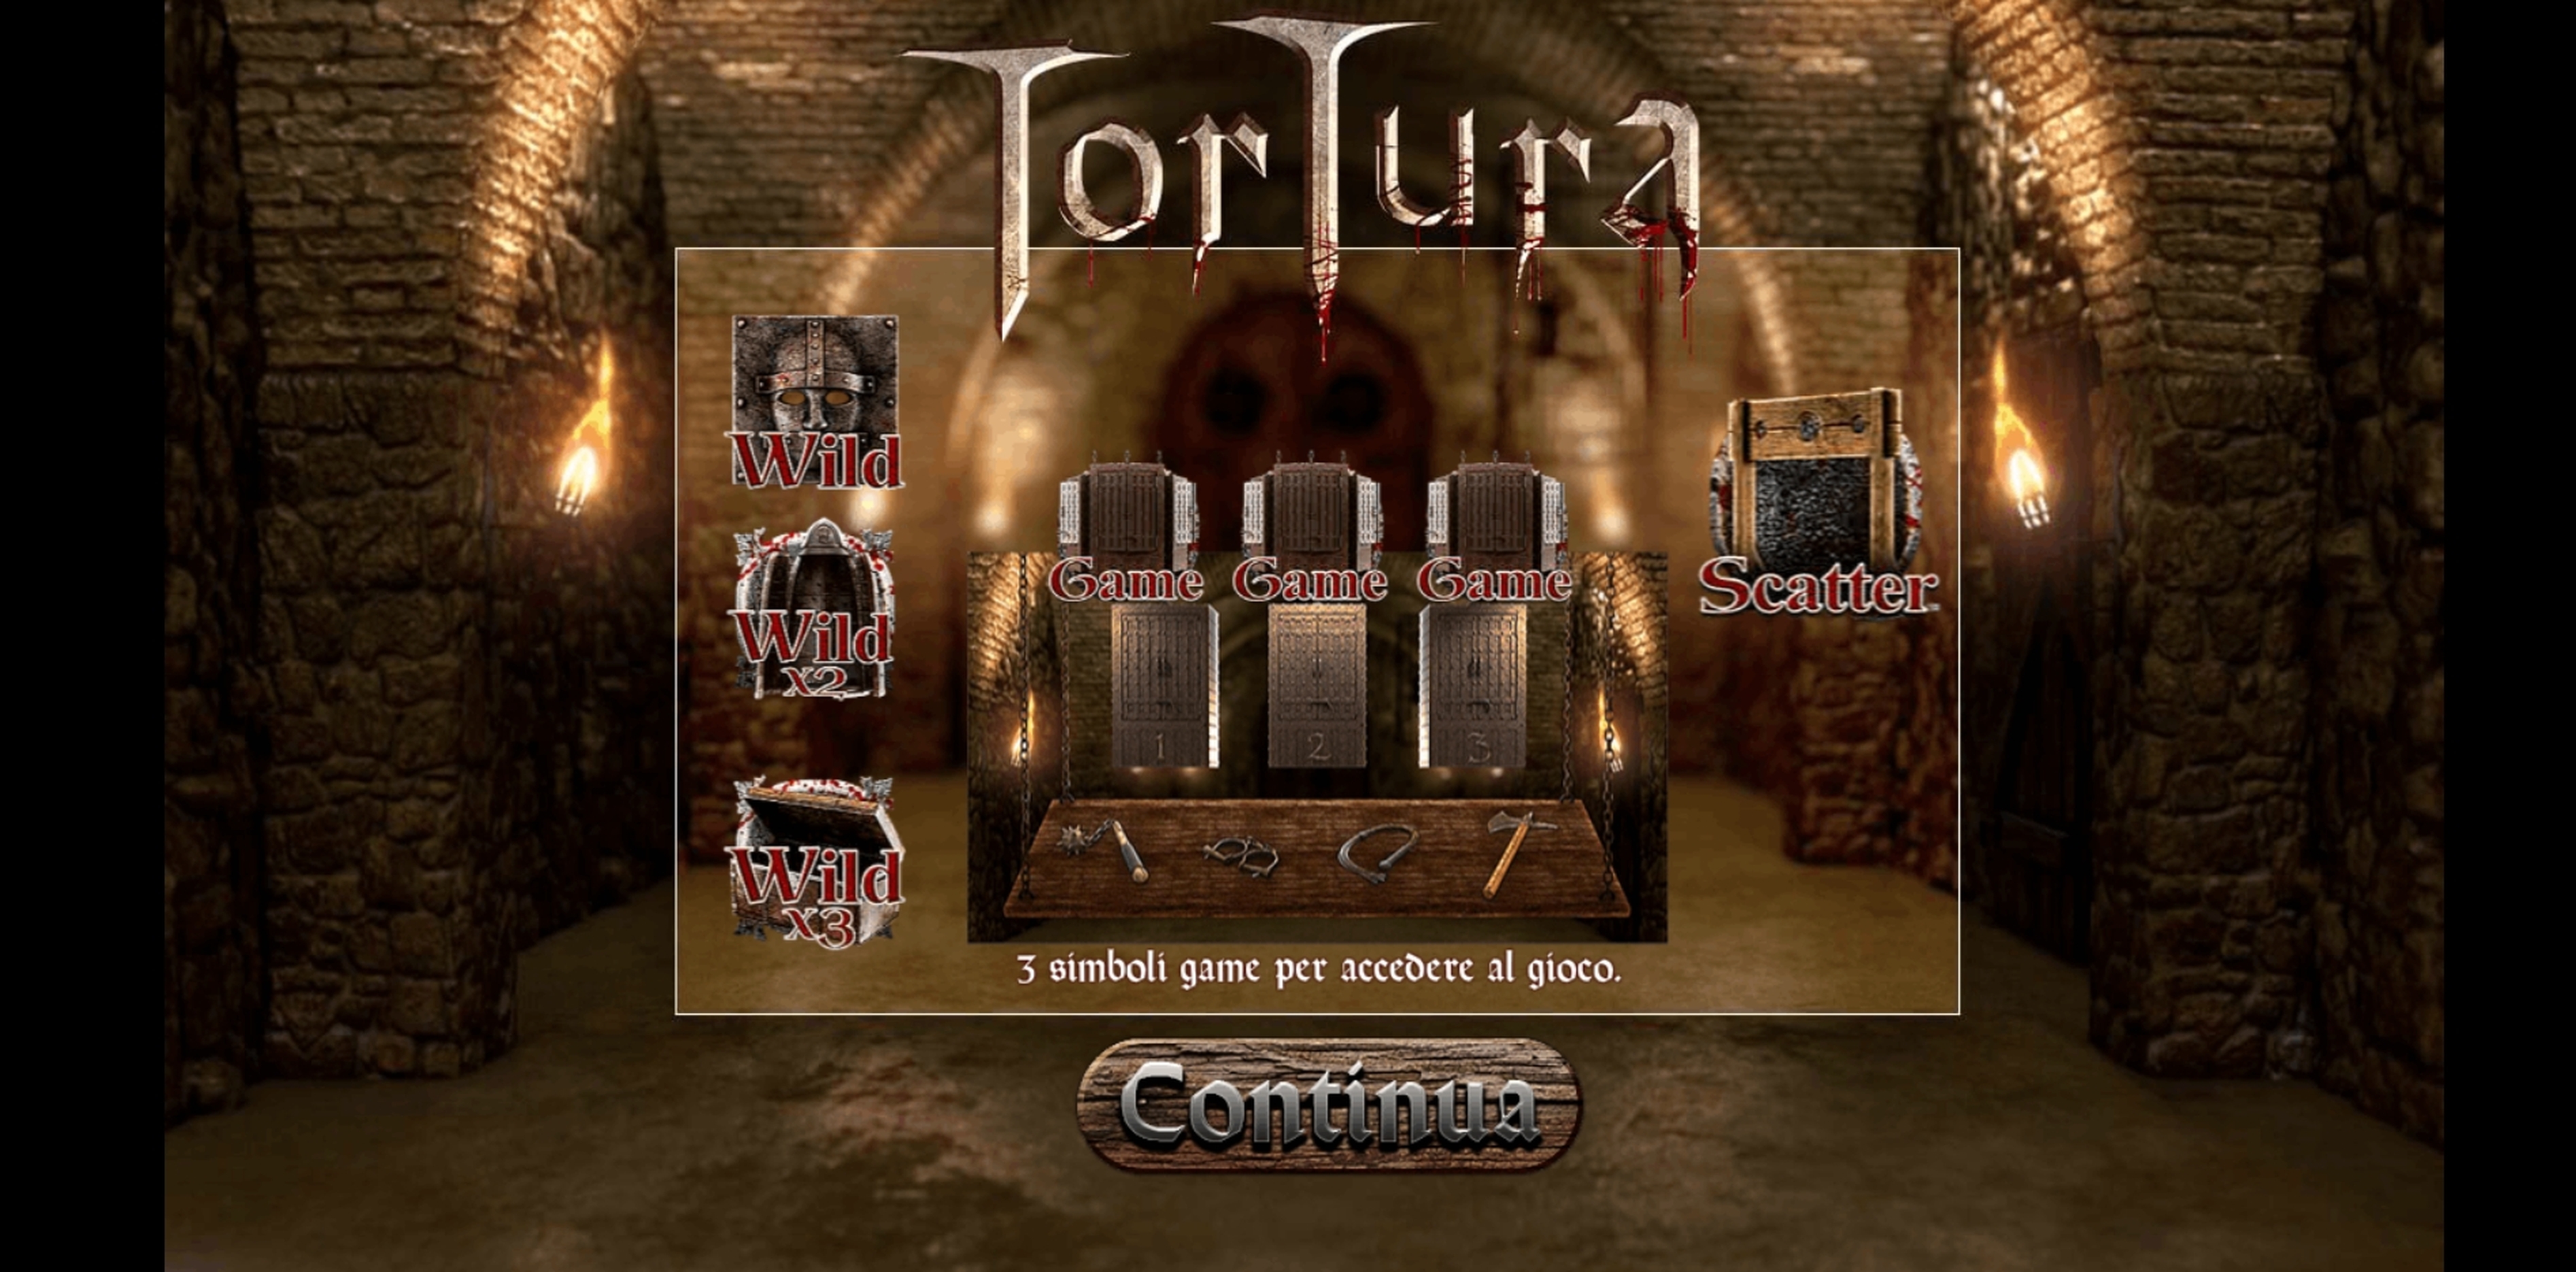 Play Tortura Free Casino Slot Game by Tuko Productions